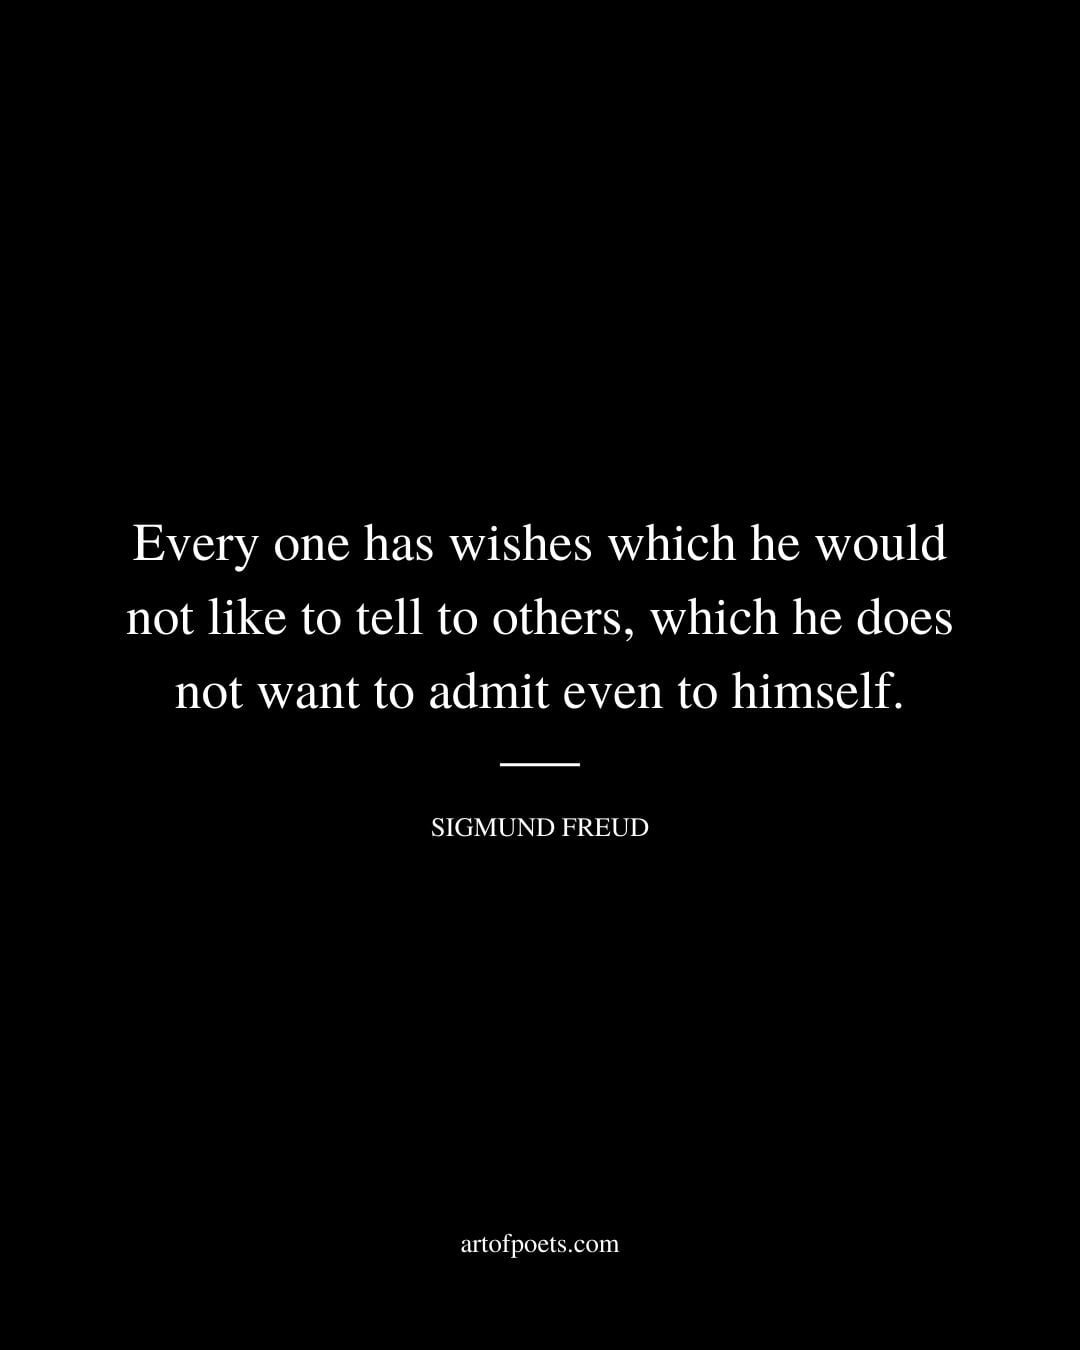 Every one has wishes which he would not like to tell to others which he does not want to admit even to himself